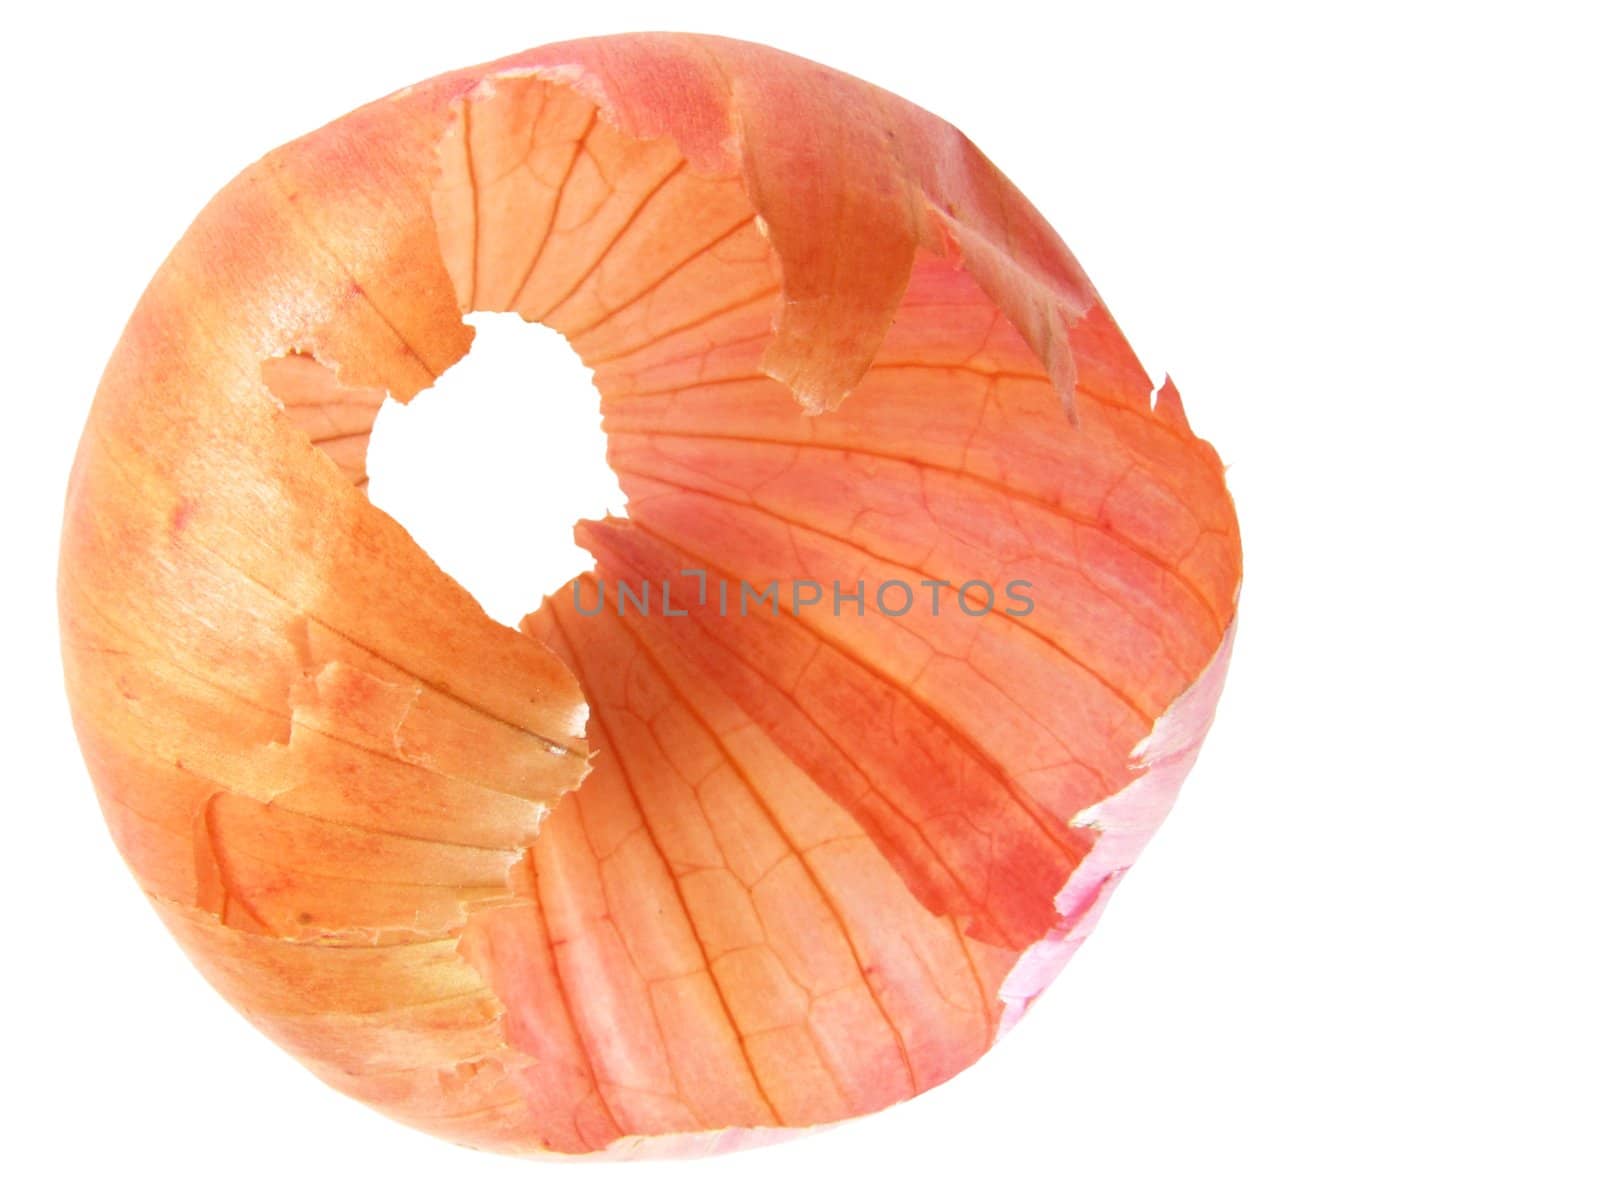 closeup of hollow peeled onion skin isolated on white